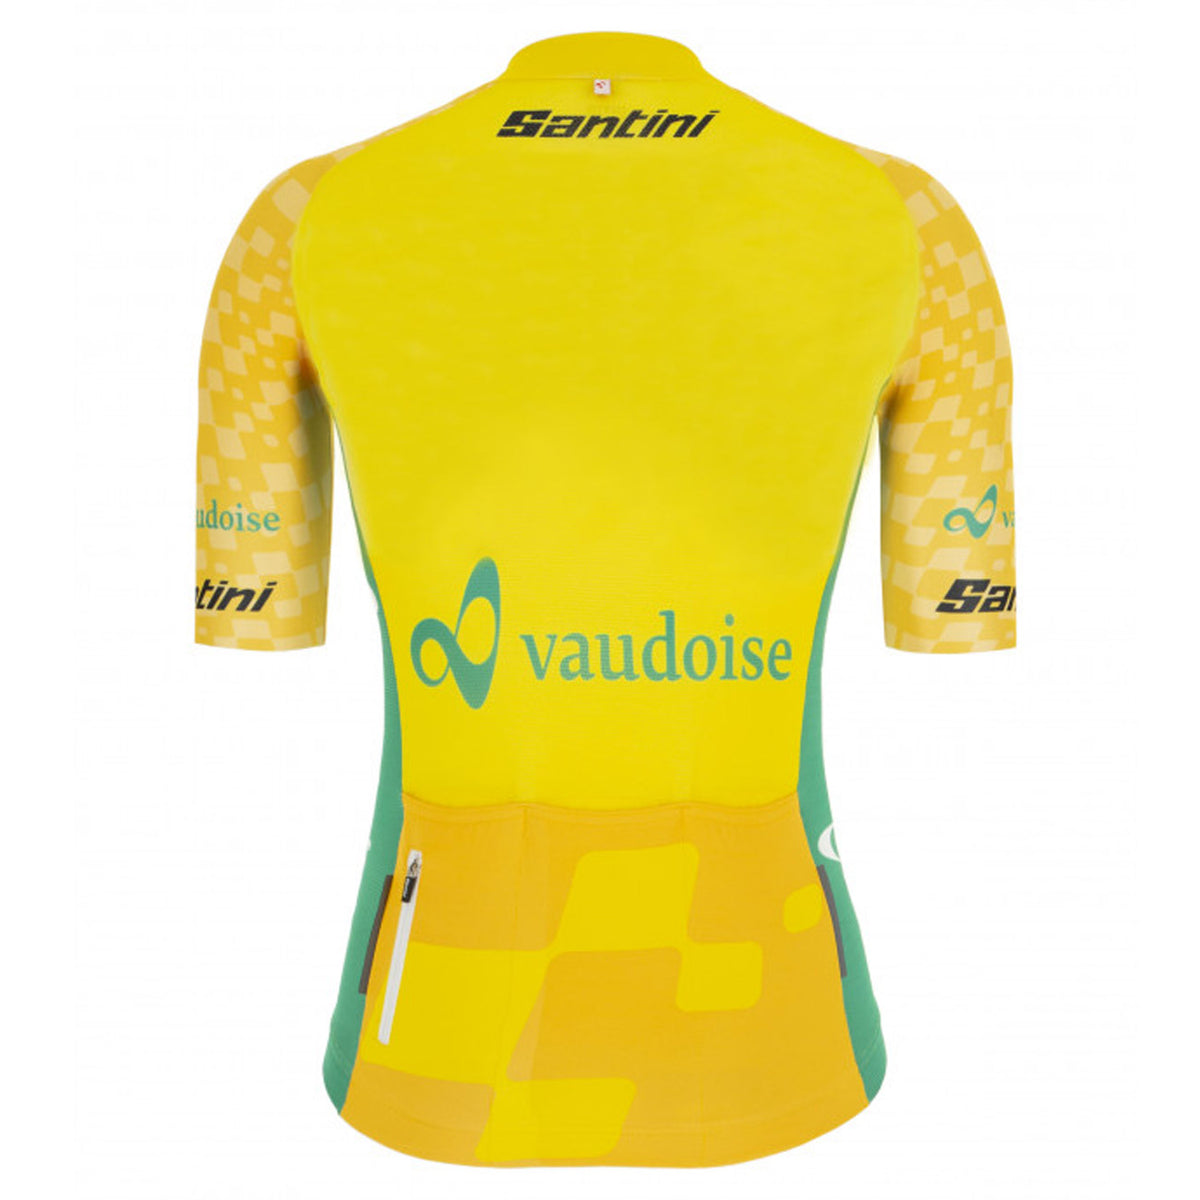 2018 Tour De Suisse Yellow Leaders Cycling Jersey Made in Italy by Santini